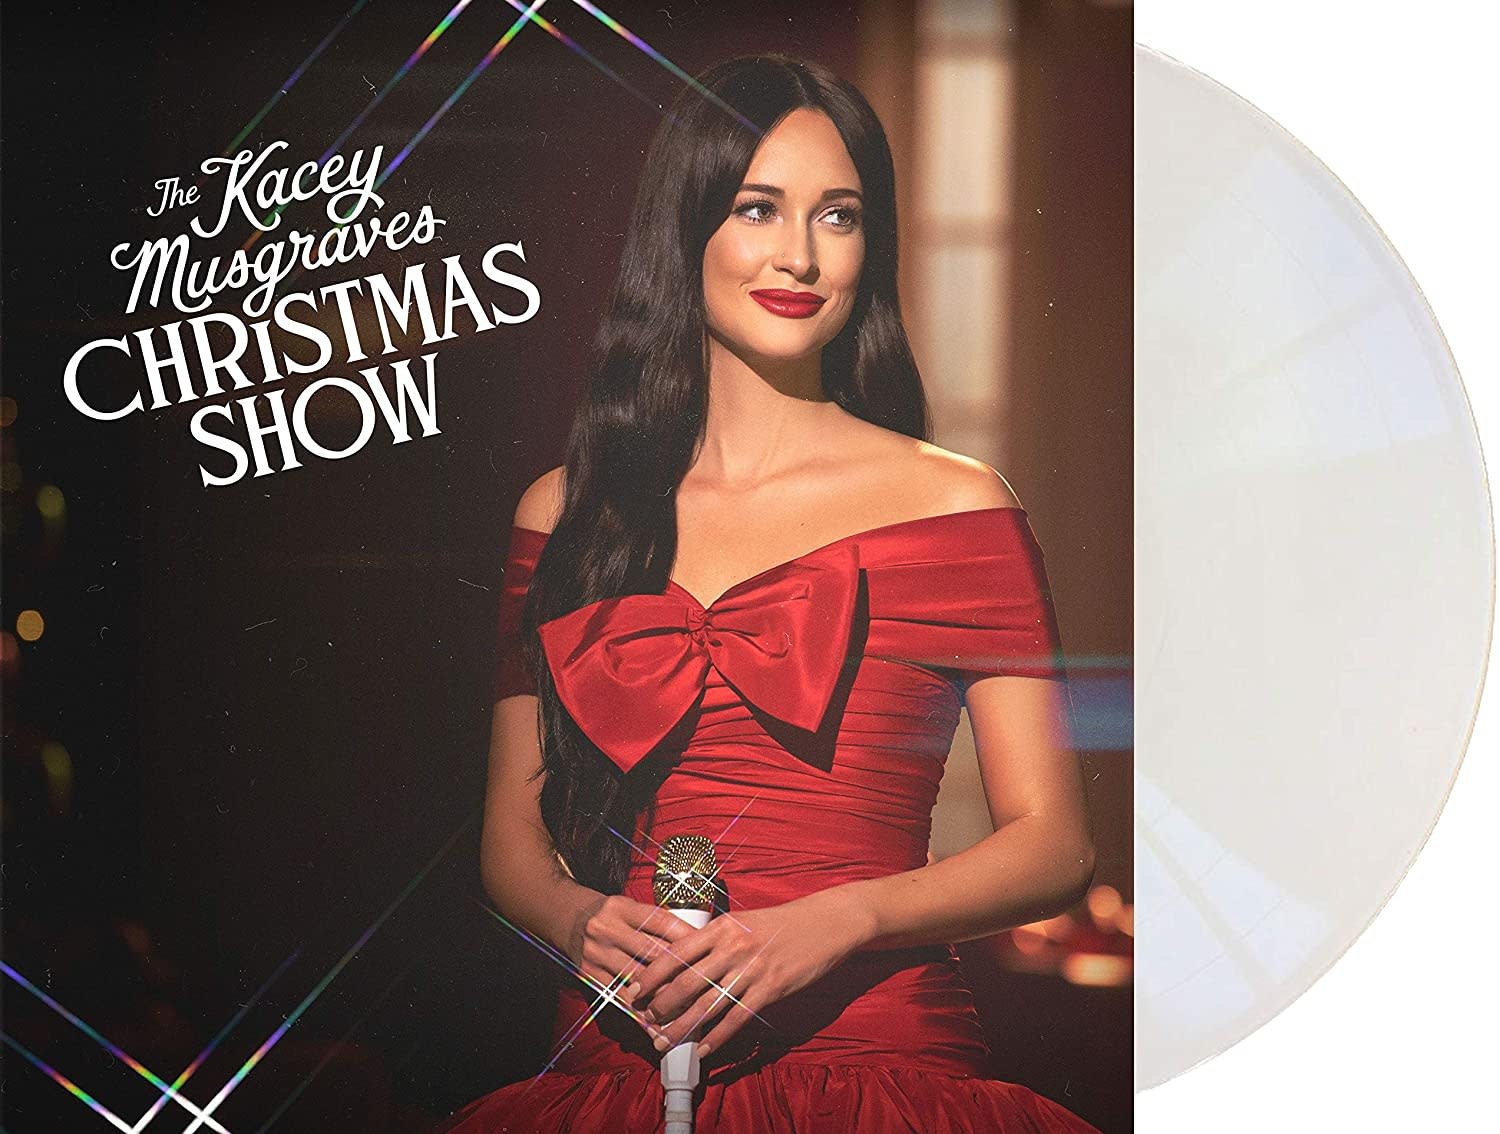 Kacey Musgraves ‎– The Kacey Musgraves Christmas Show